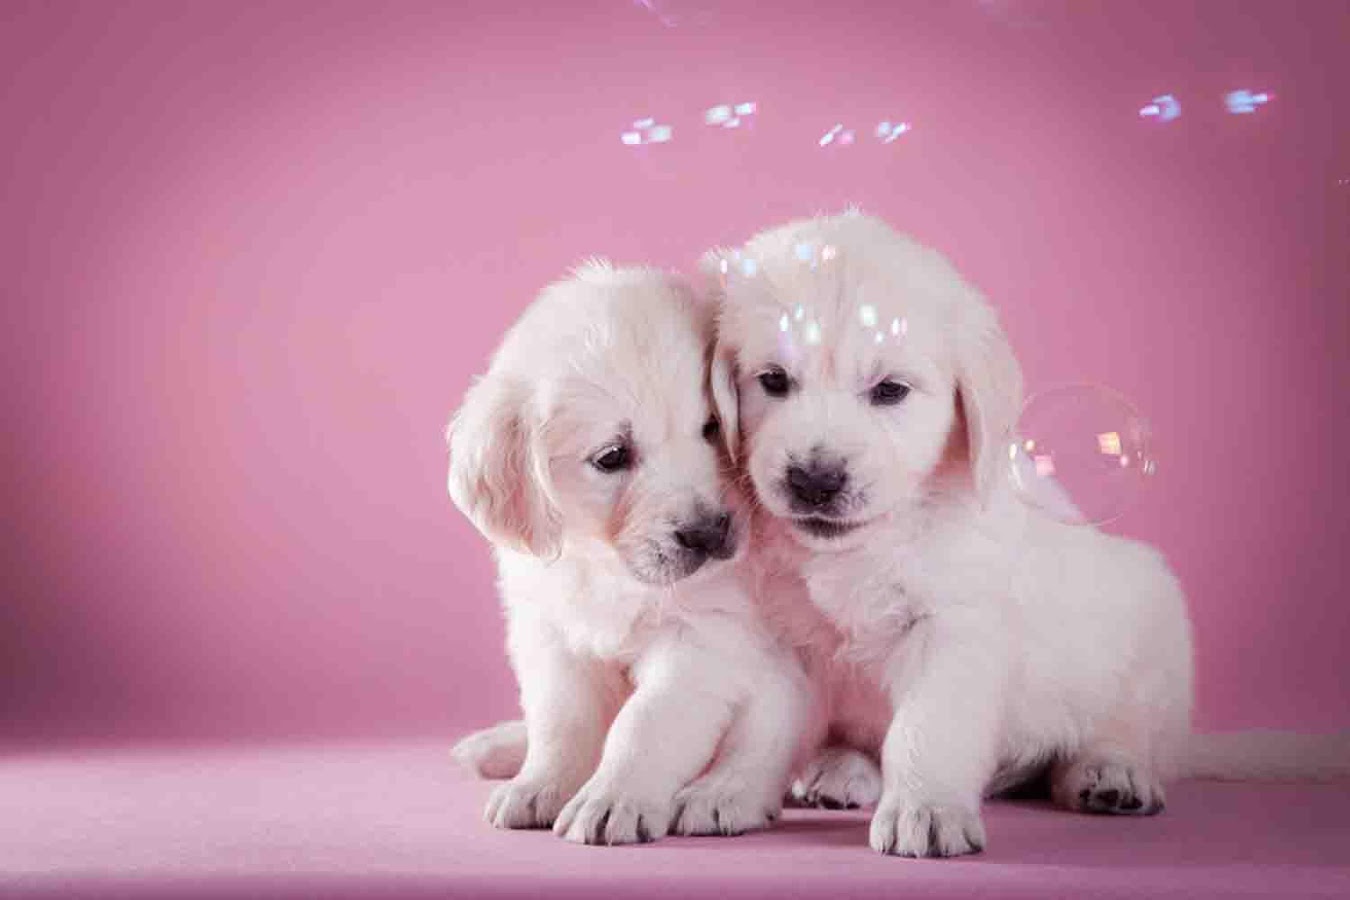 Cute Puppy Backgrounds Android Apps on Google Play